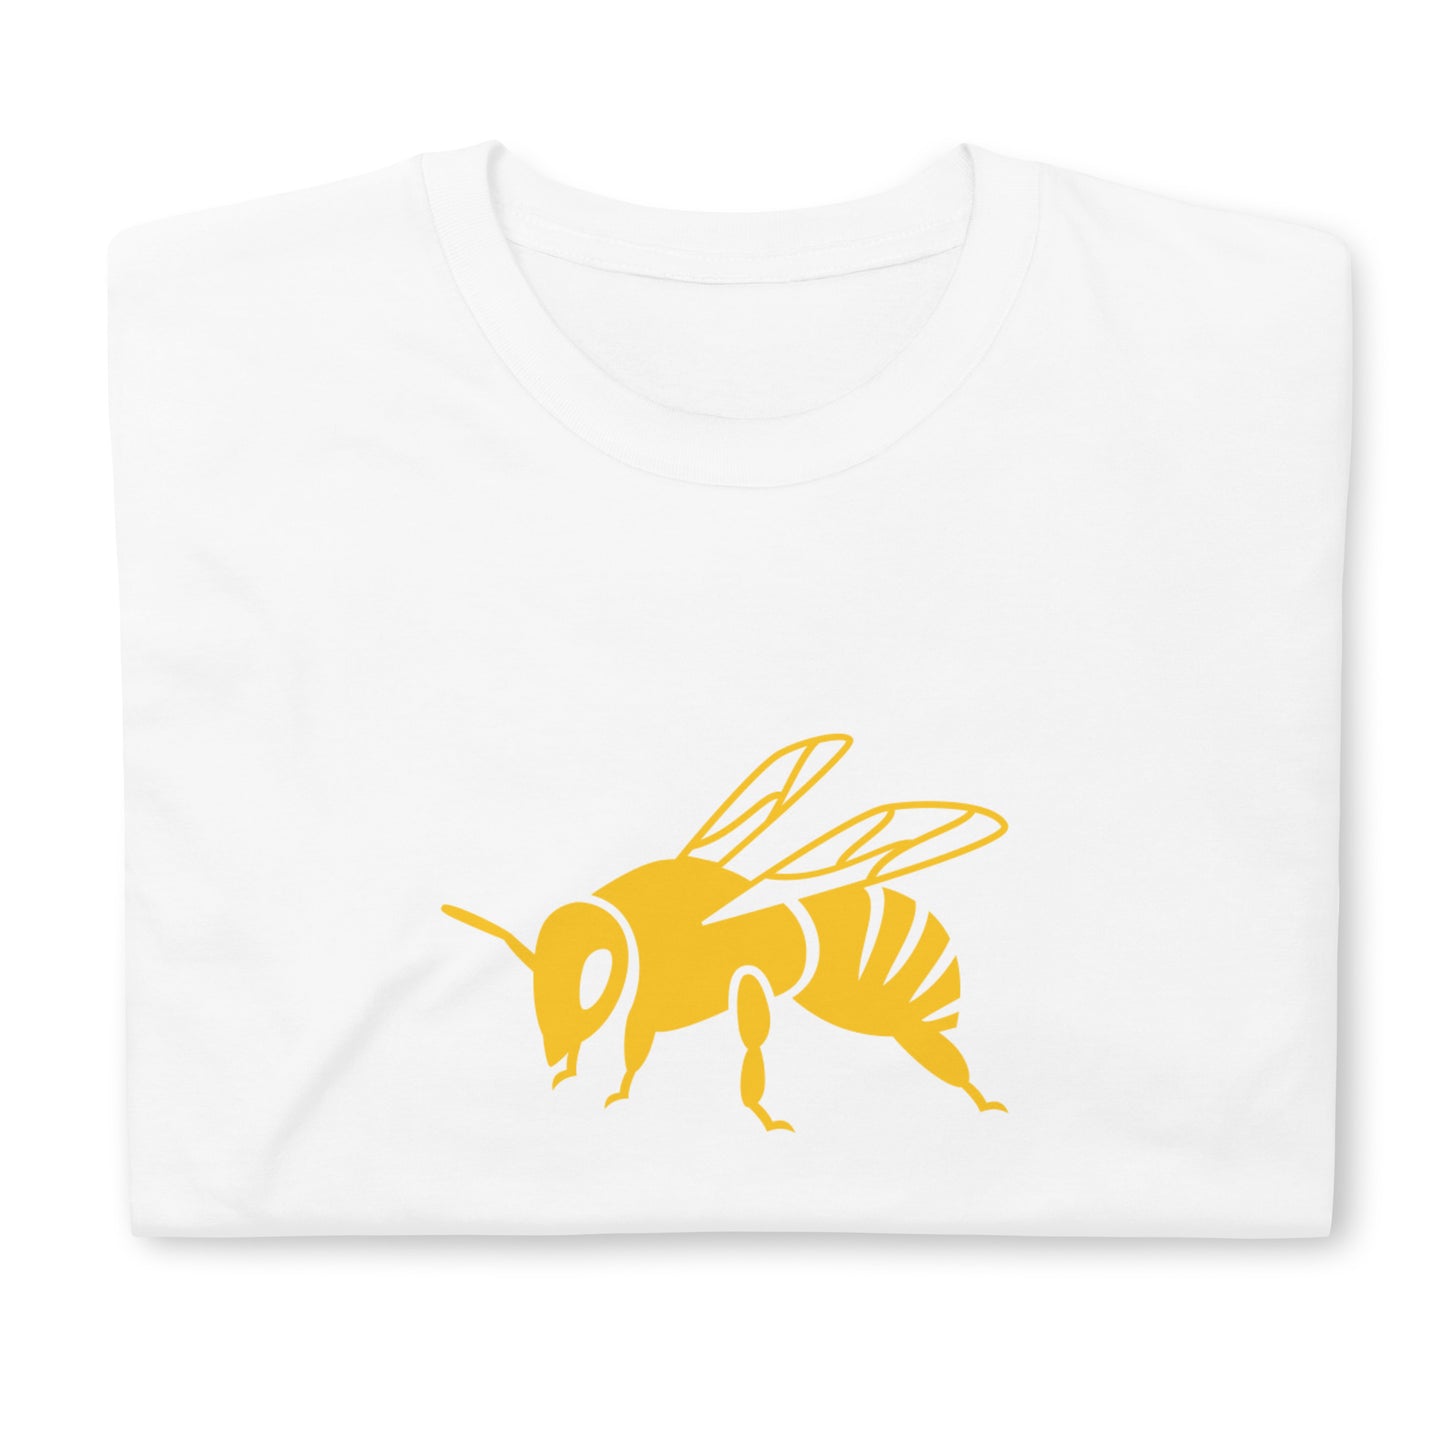 Bee Collection Basic T-Shirt